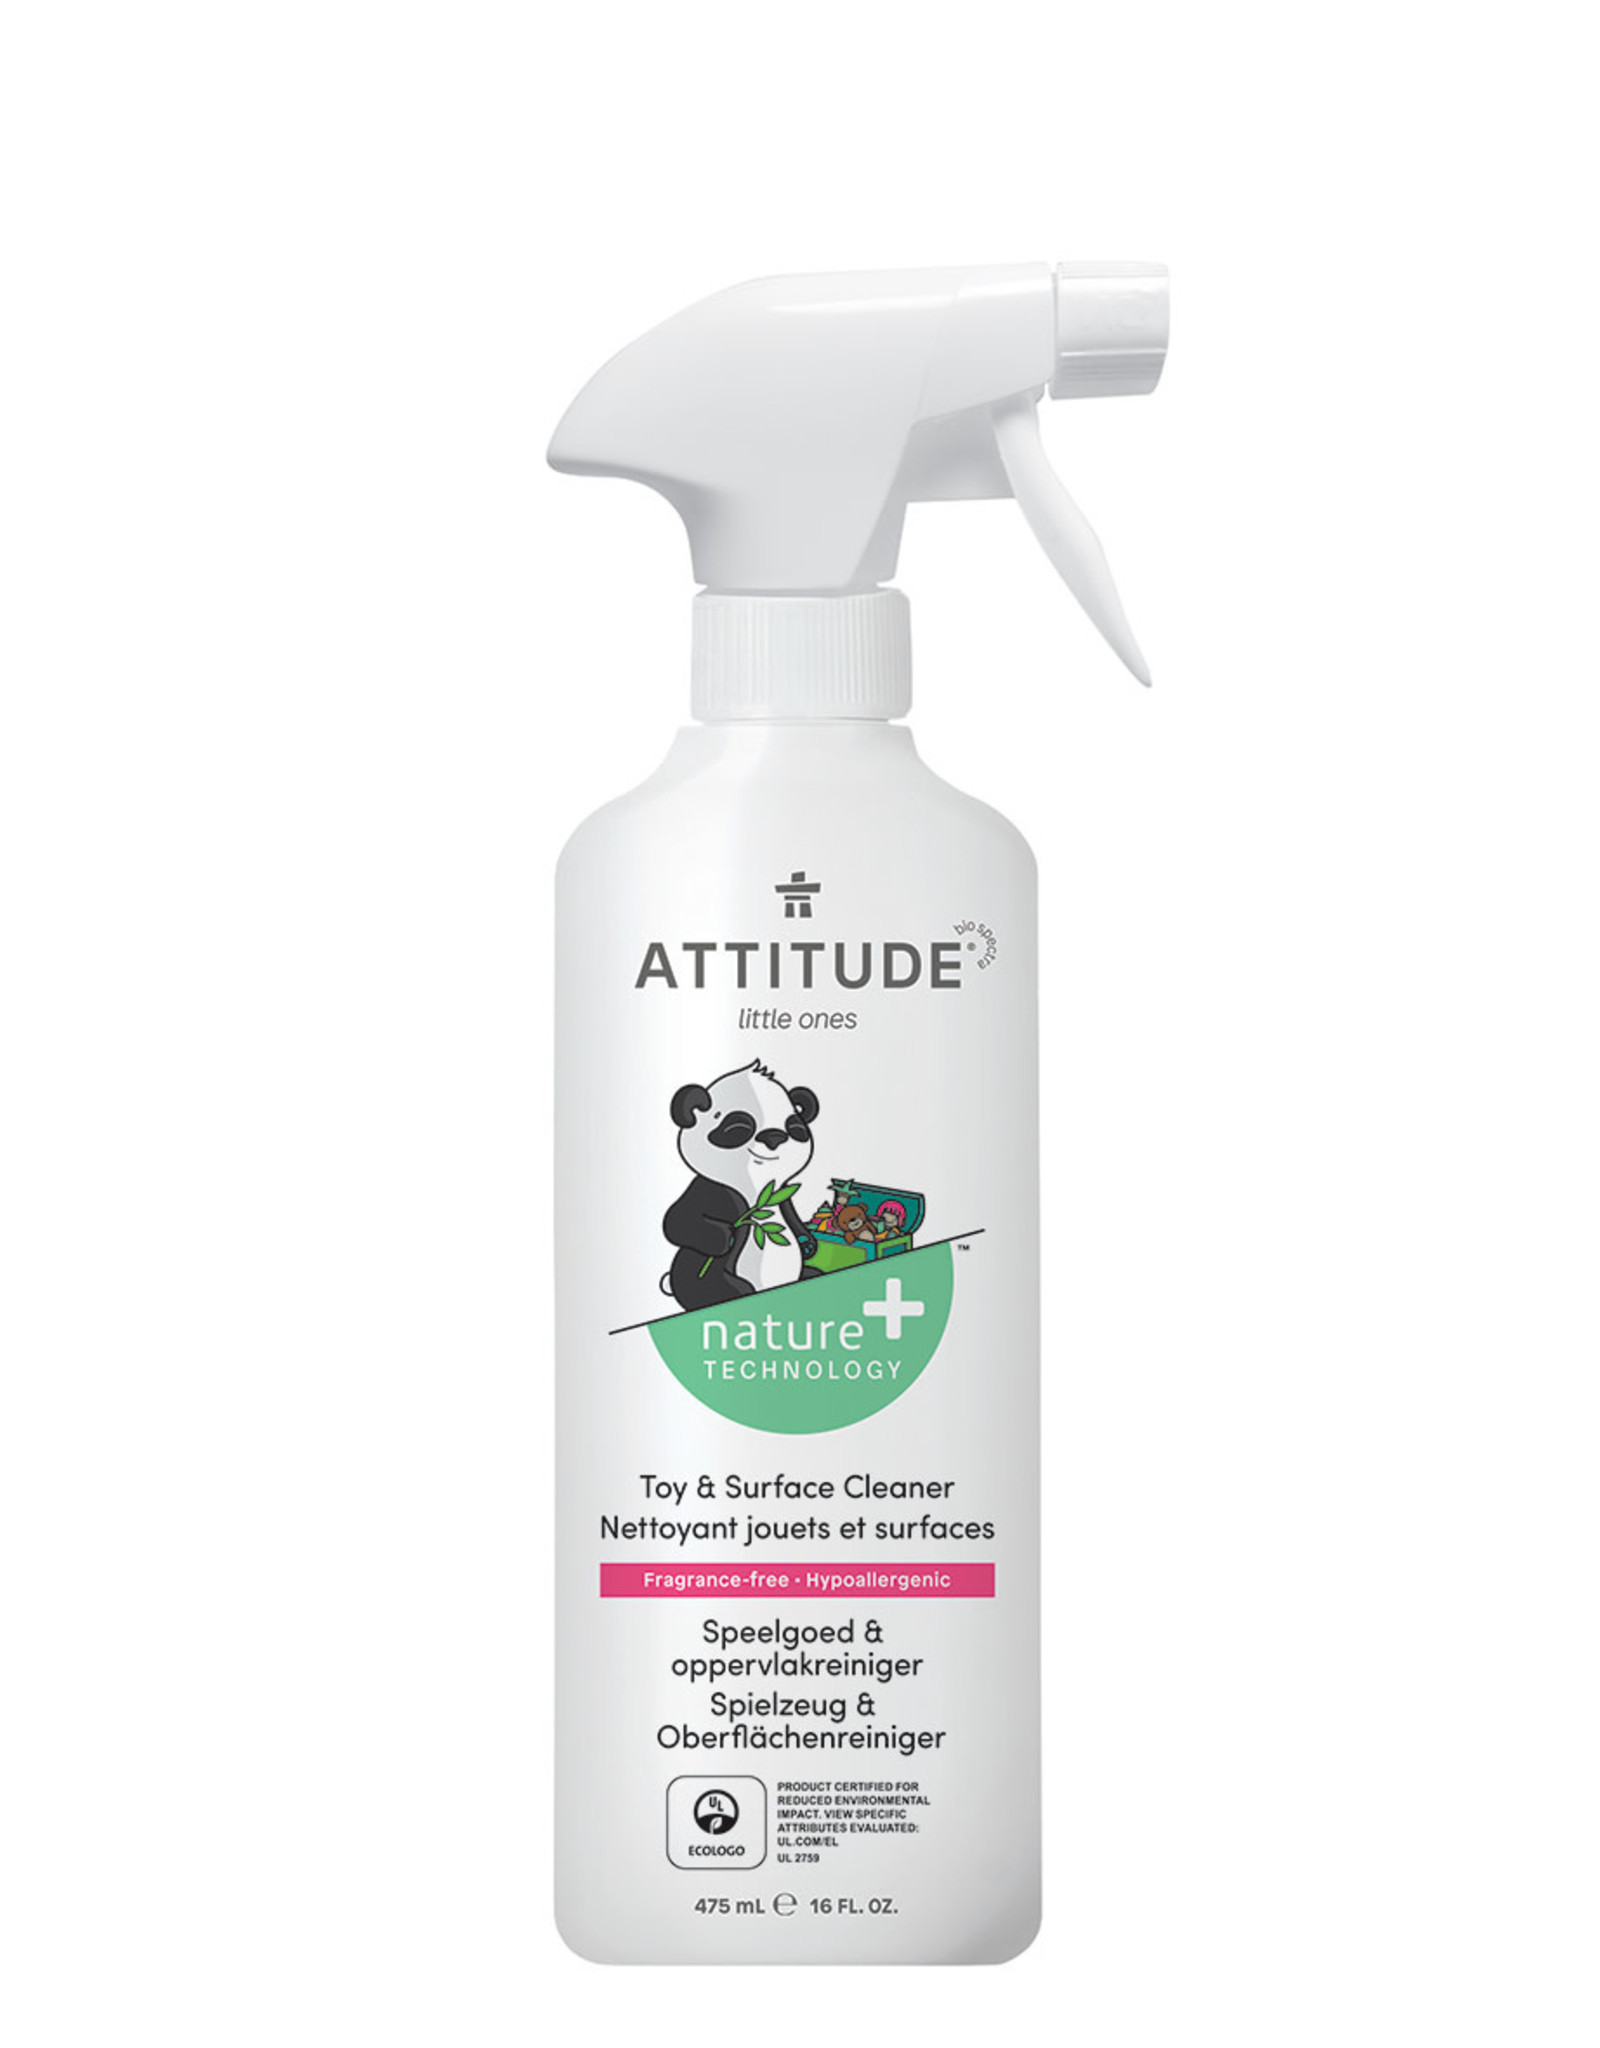 Attitude Attitude Baby Little Ones Toy & Surface Cleaner 475 ml